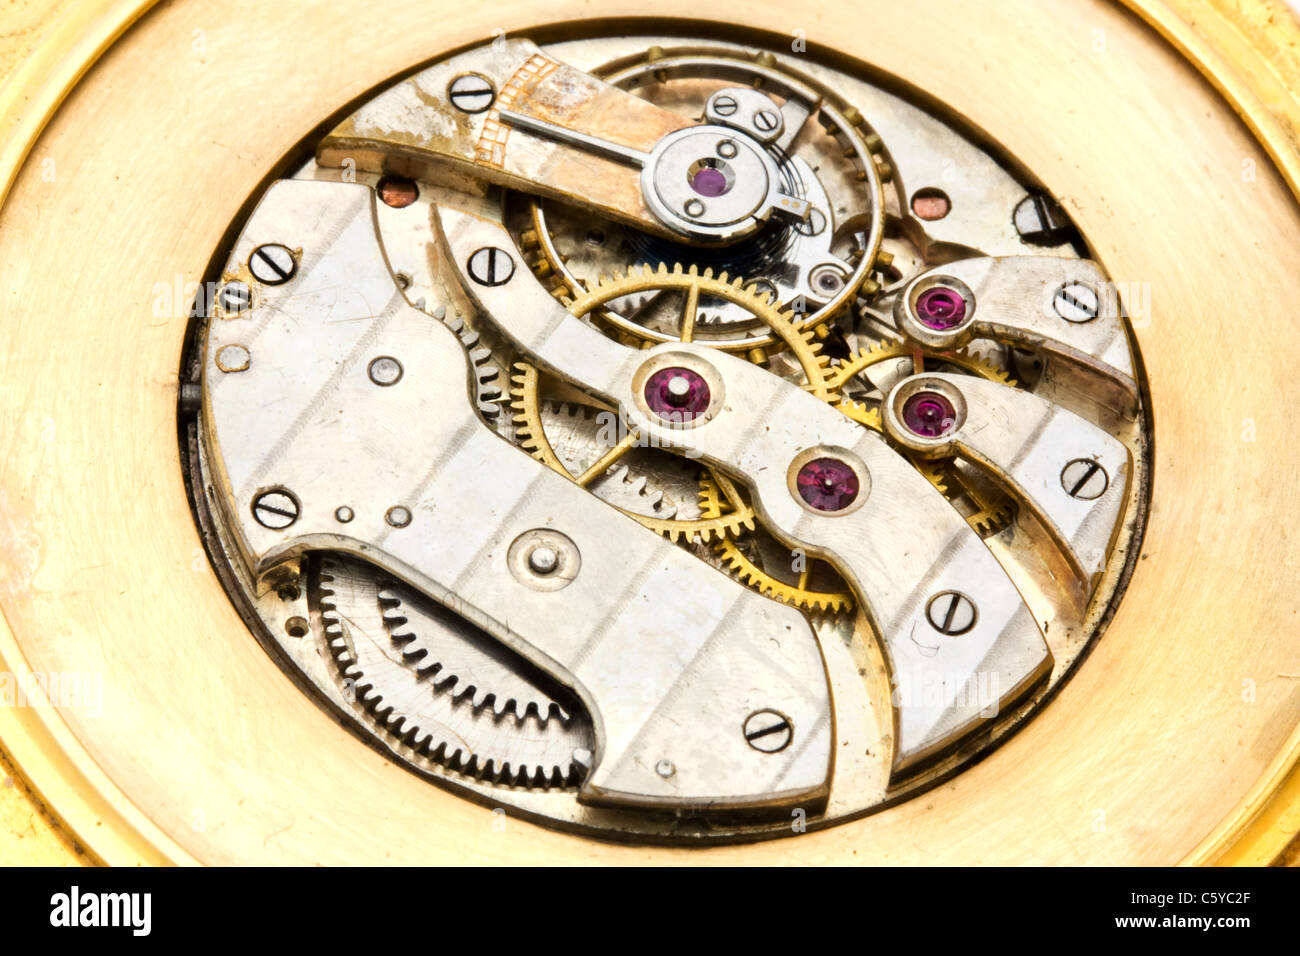 Inside workings of a gold watch Stock Photo